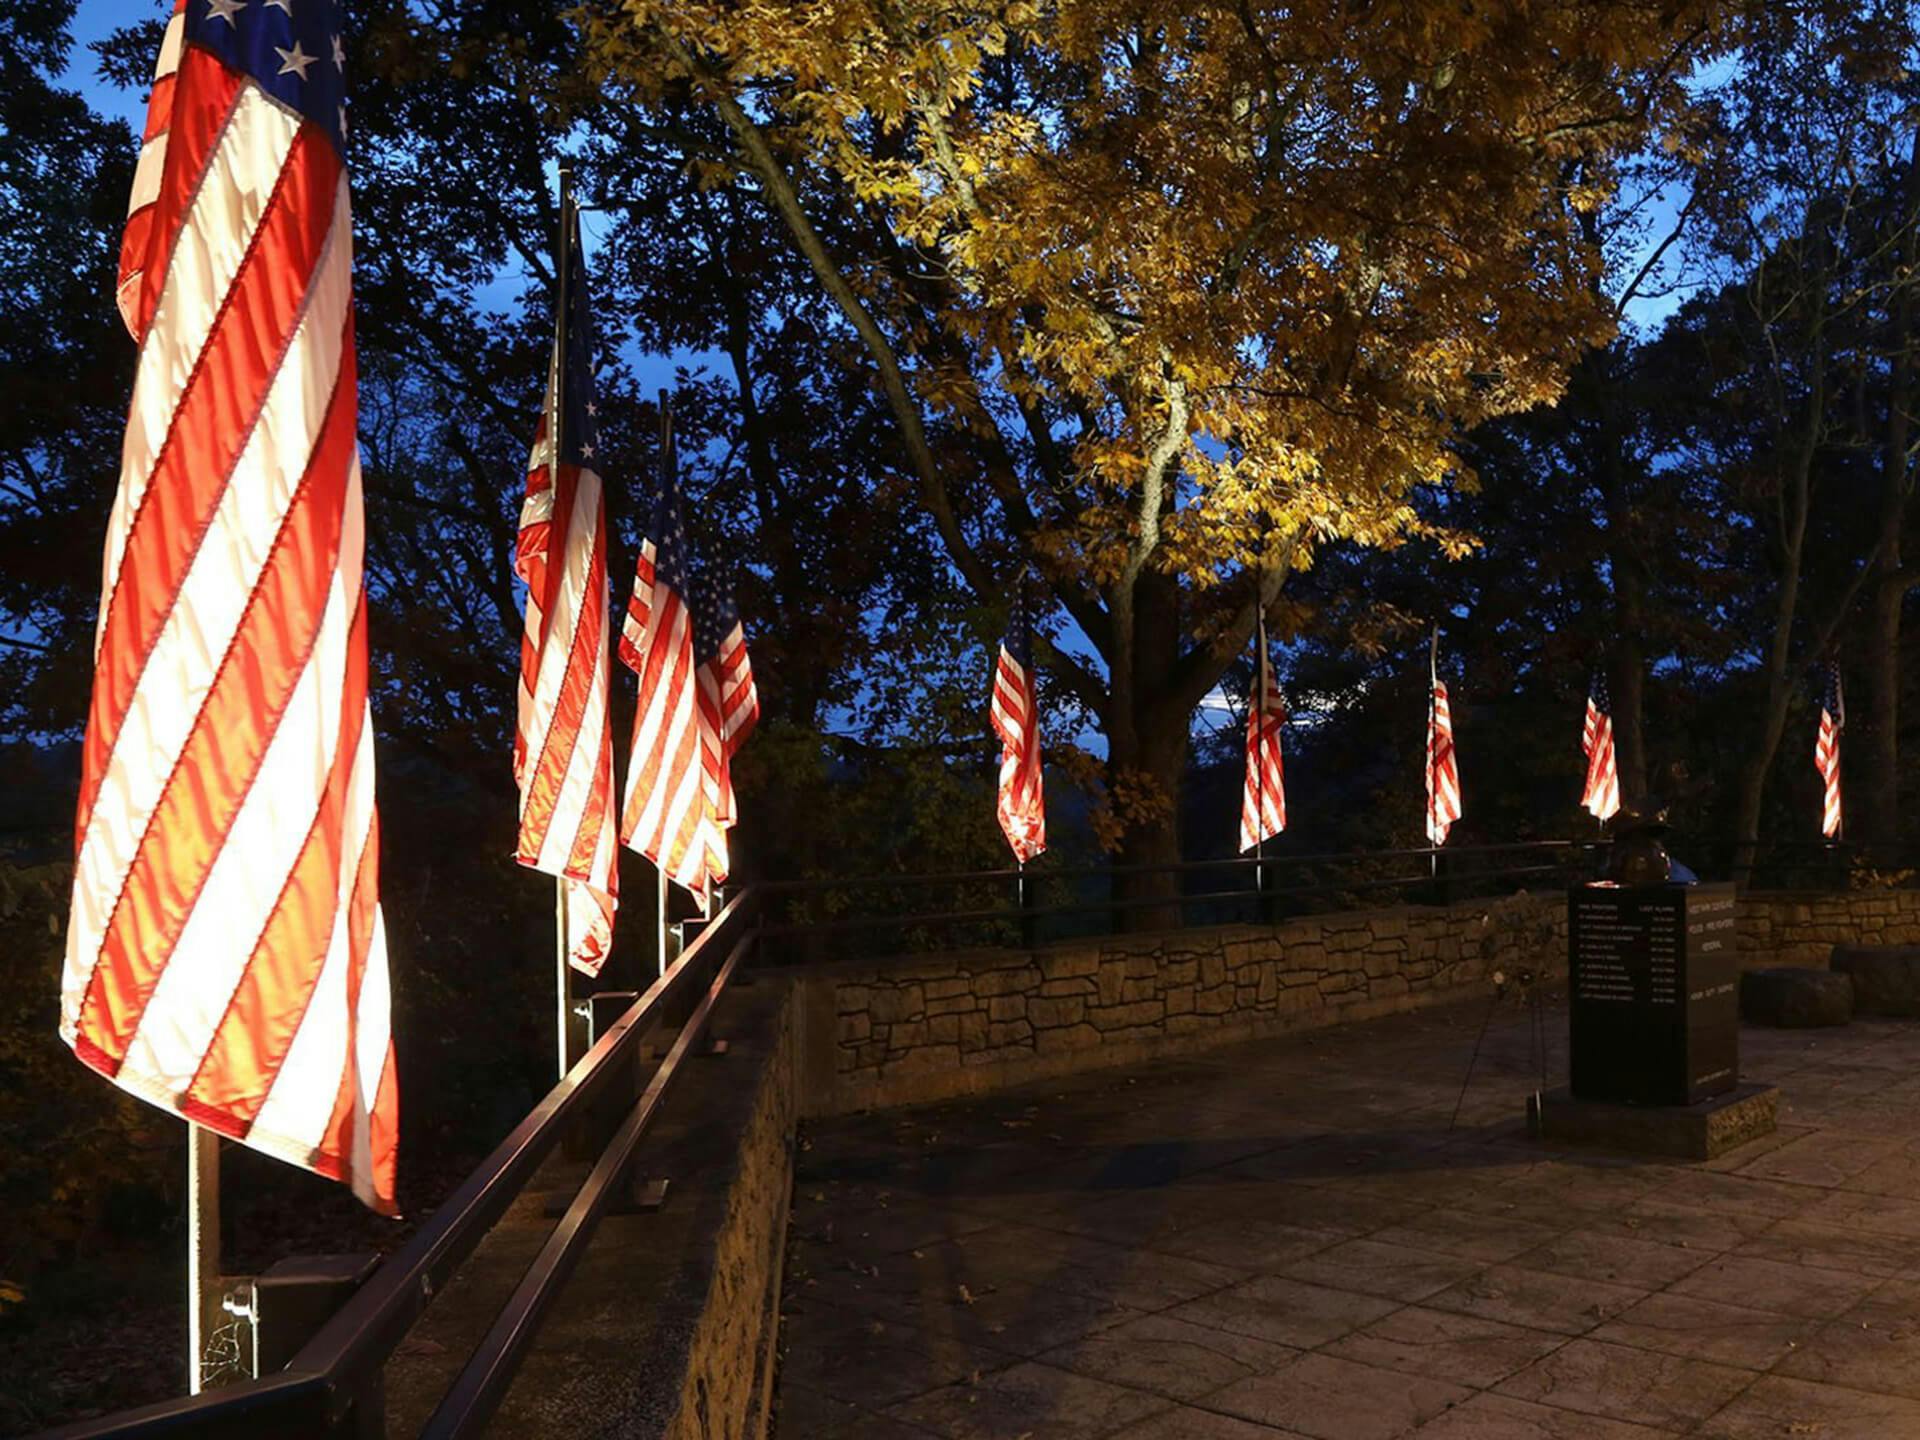 West Park memorial at night with several American flags hanging and features uplighting on each